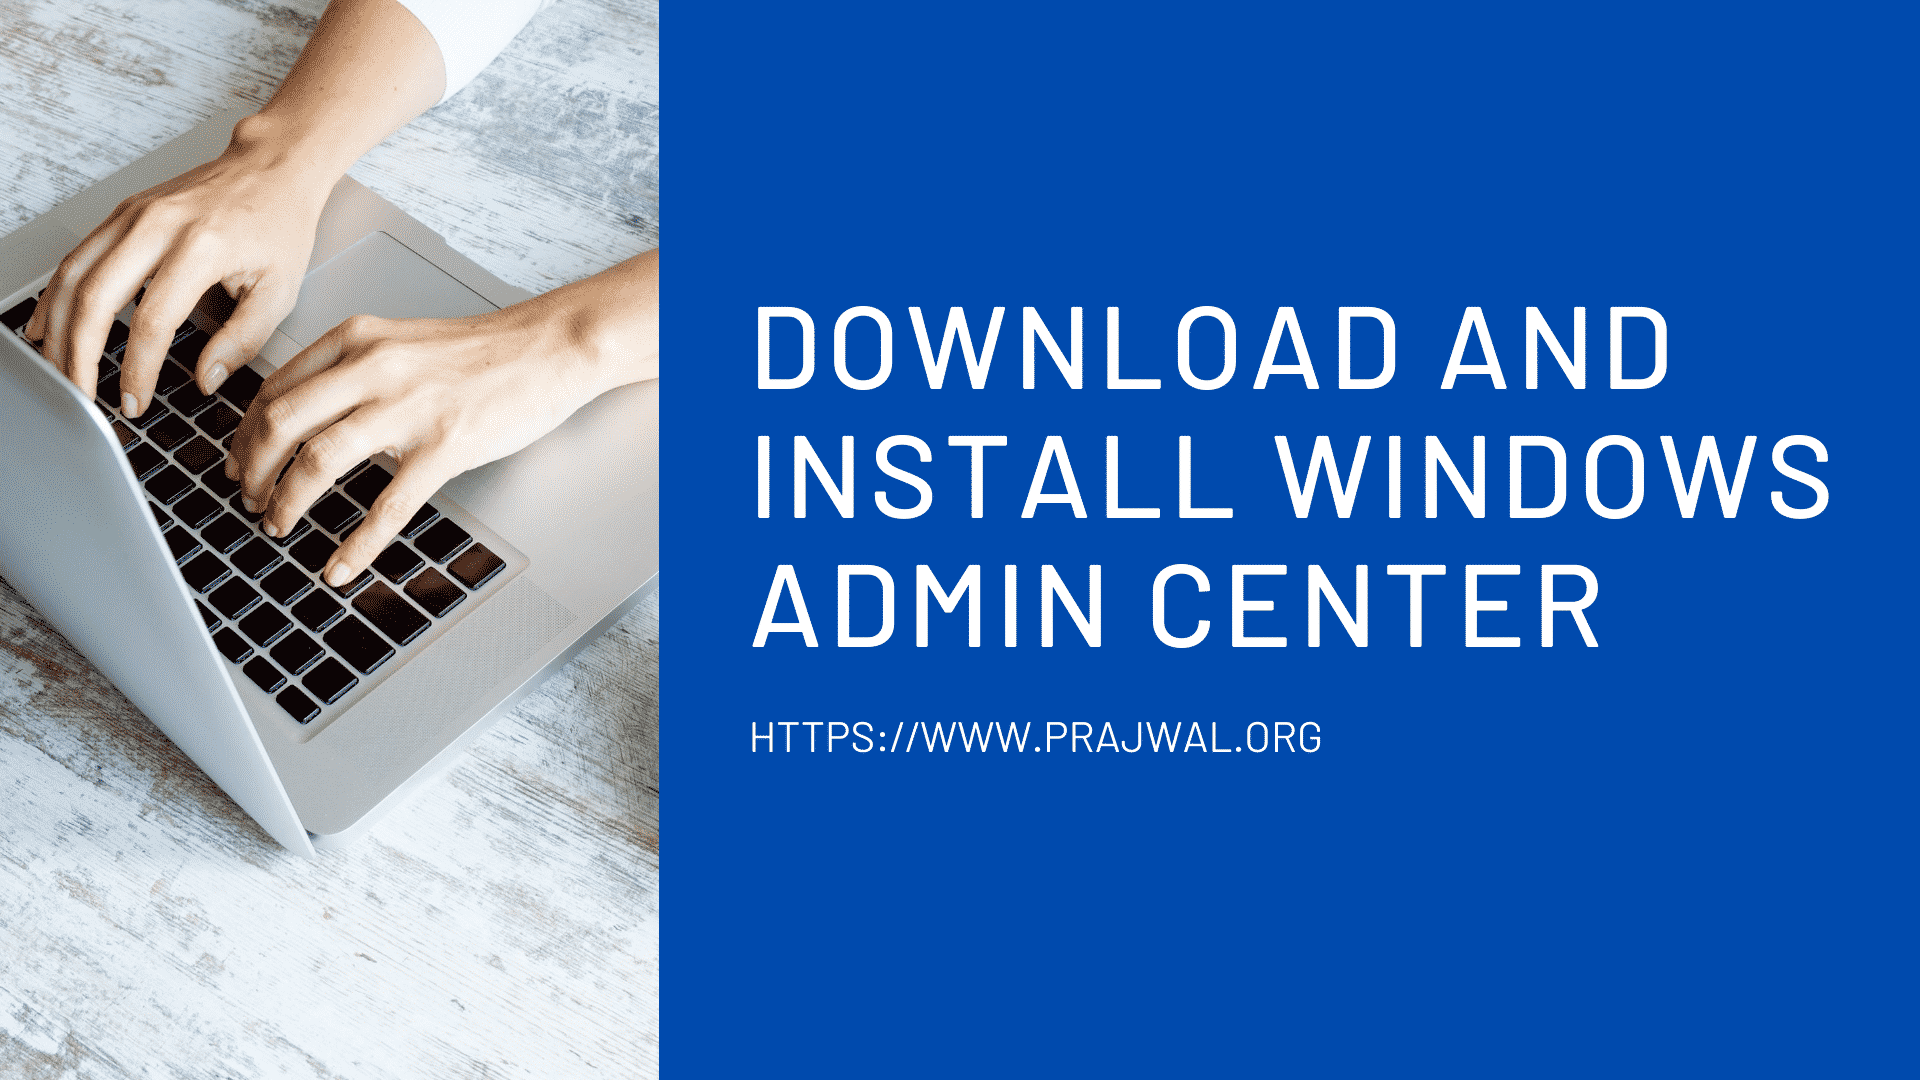 Download and Install Windows Admin Center